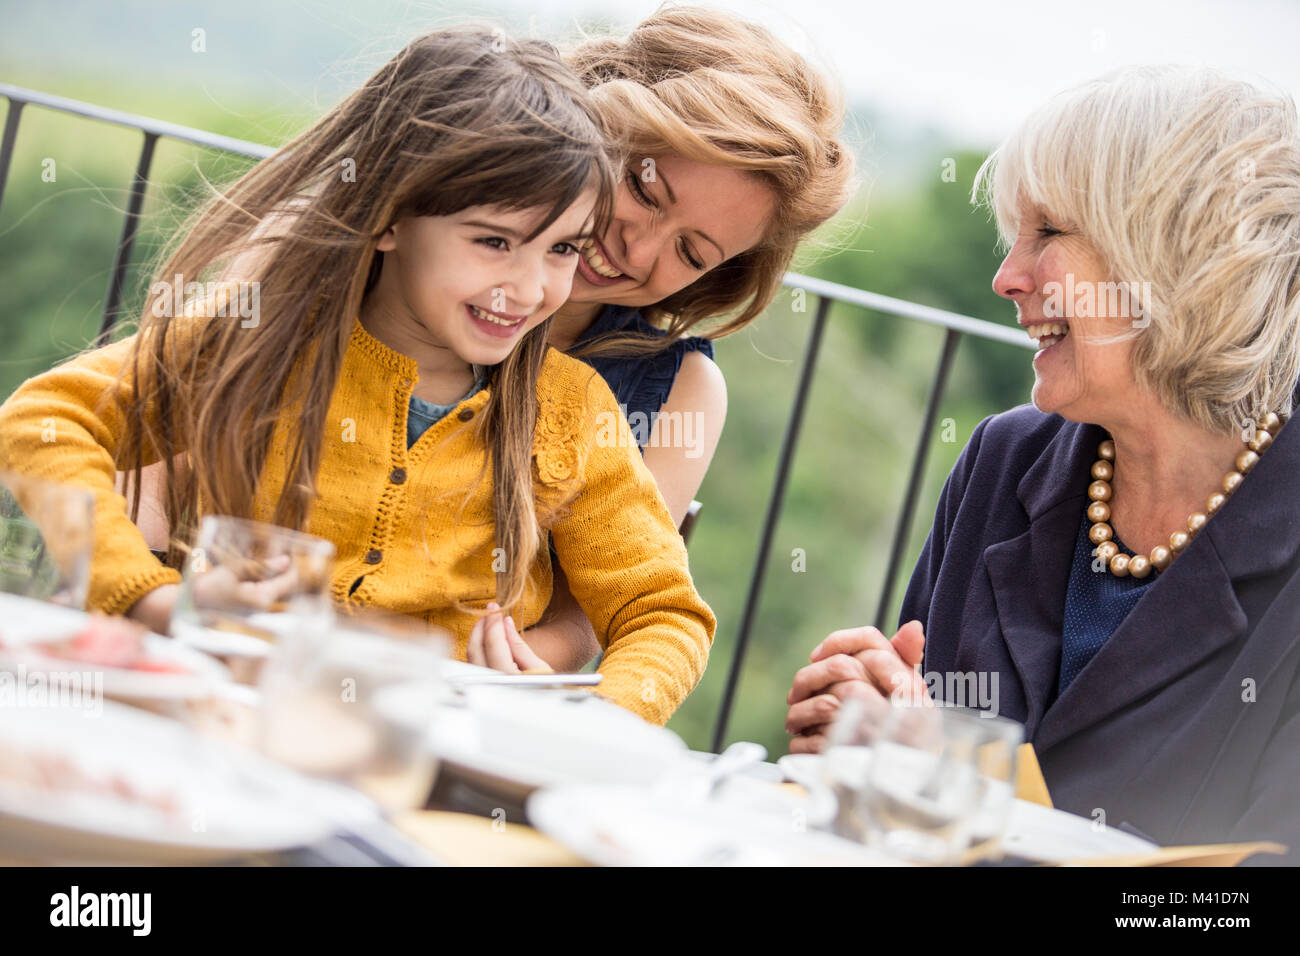 Three generations of women at a family meal Stock Photo